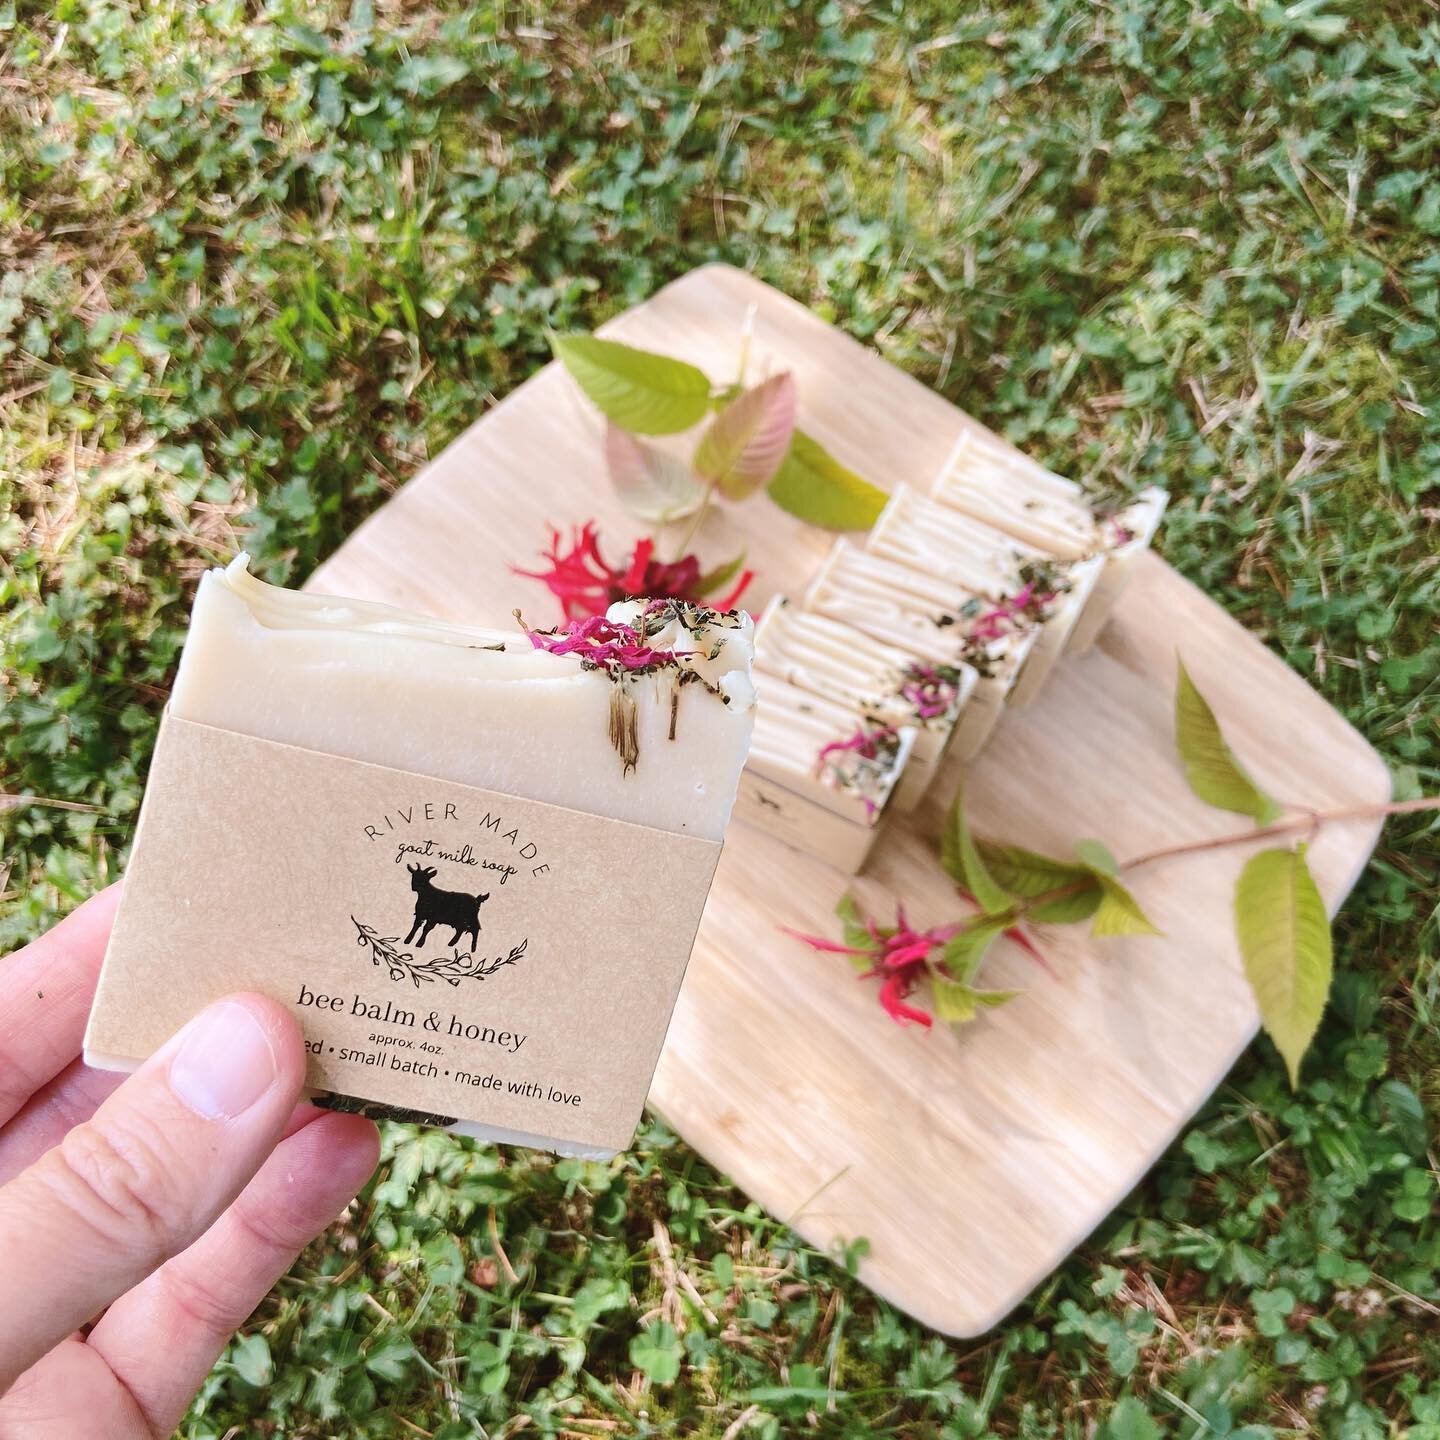 Bee Balm &amp; Honey bars are ready 🌺🍯 along with our lovely selection of handmade goat milk soaps, lotions, milk bath, lip balm and more ❤️ only a few weekends left to come by @themckellarmarket 10 to 1 pm in Minerva park tomorrow! See you there ?